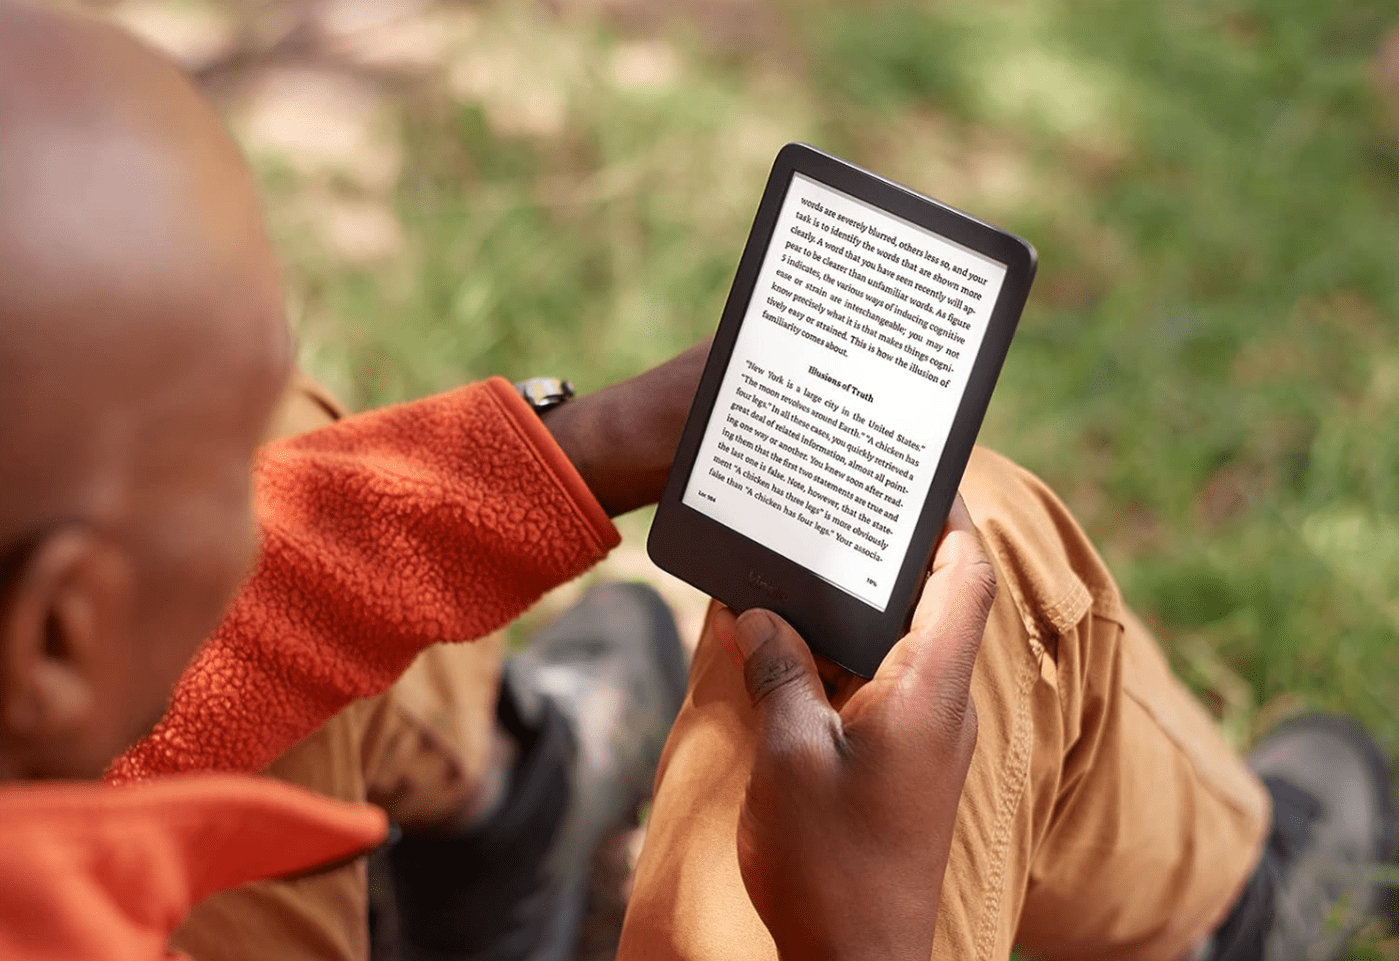 Amazon's standard Kindle is on sale for $80